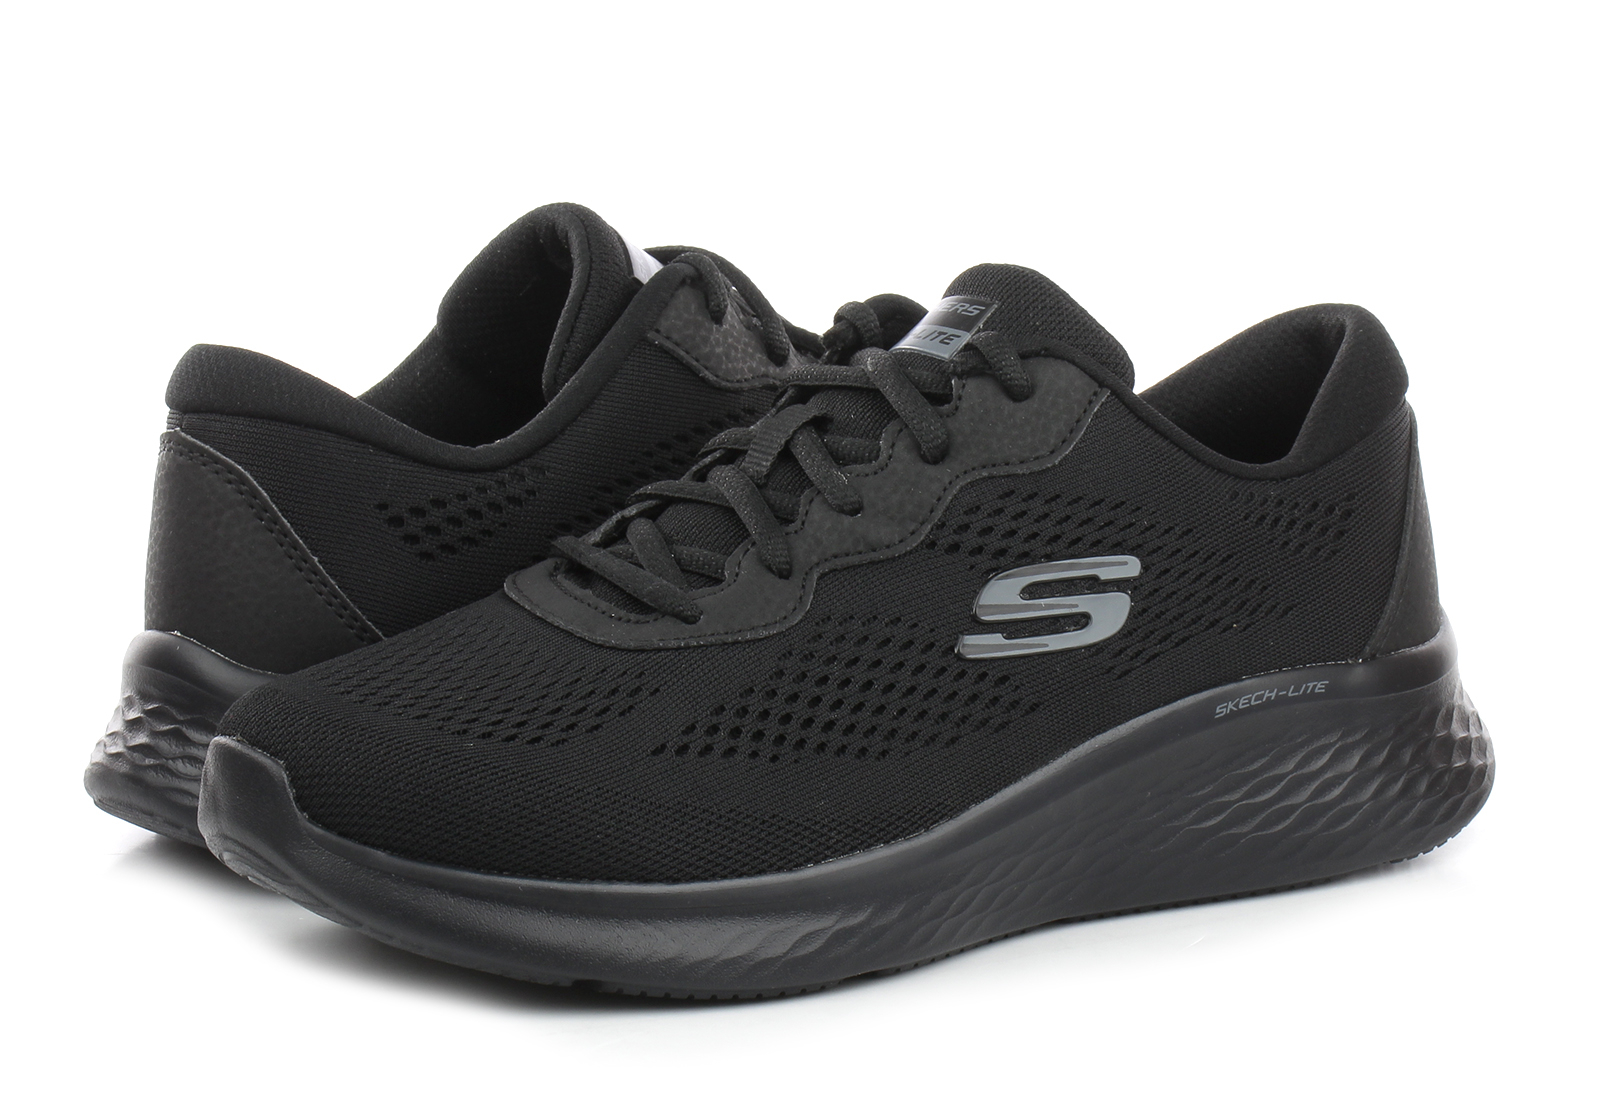 Skechers Superge Skech-lite Pro-perfect Time